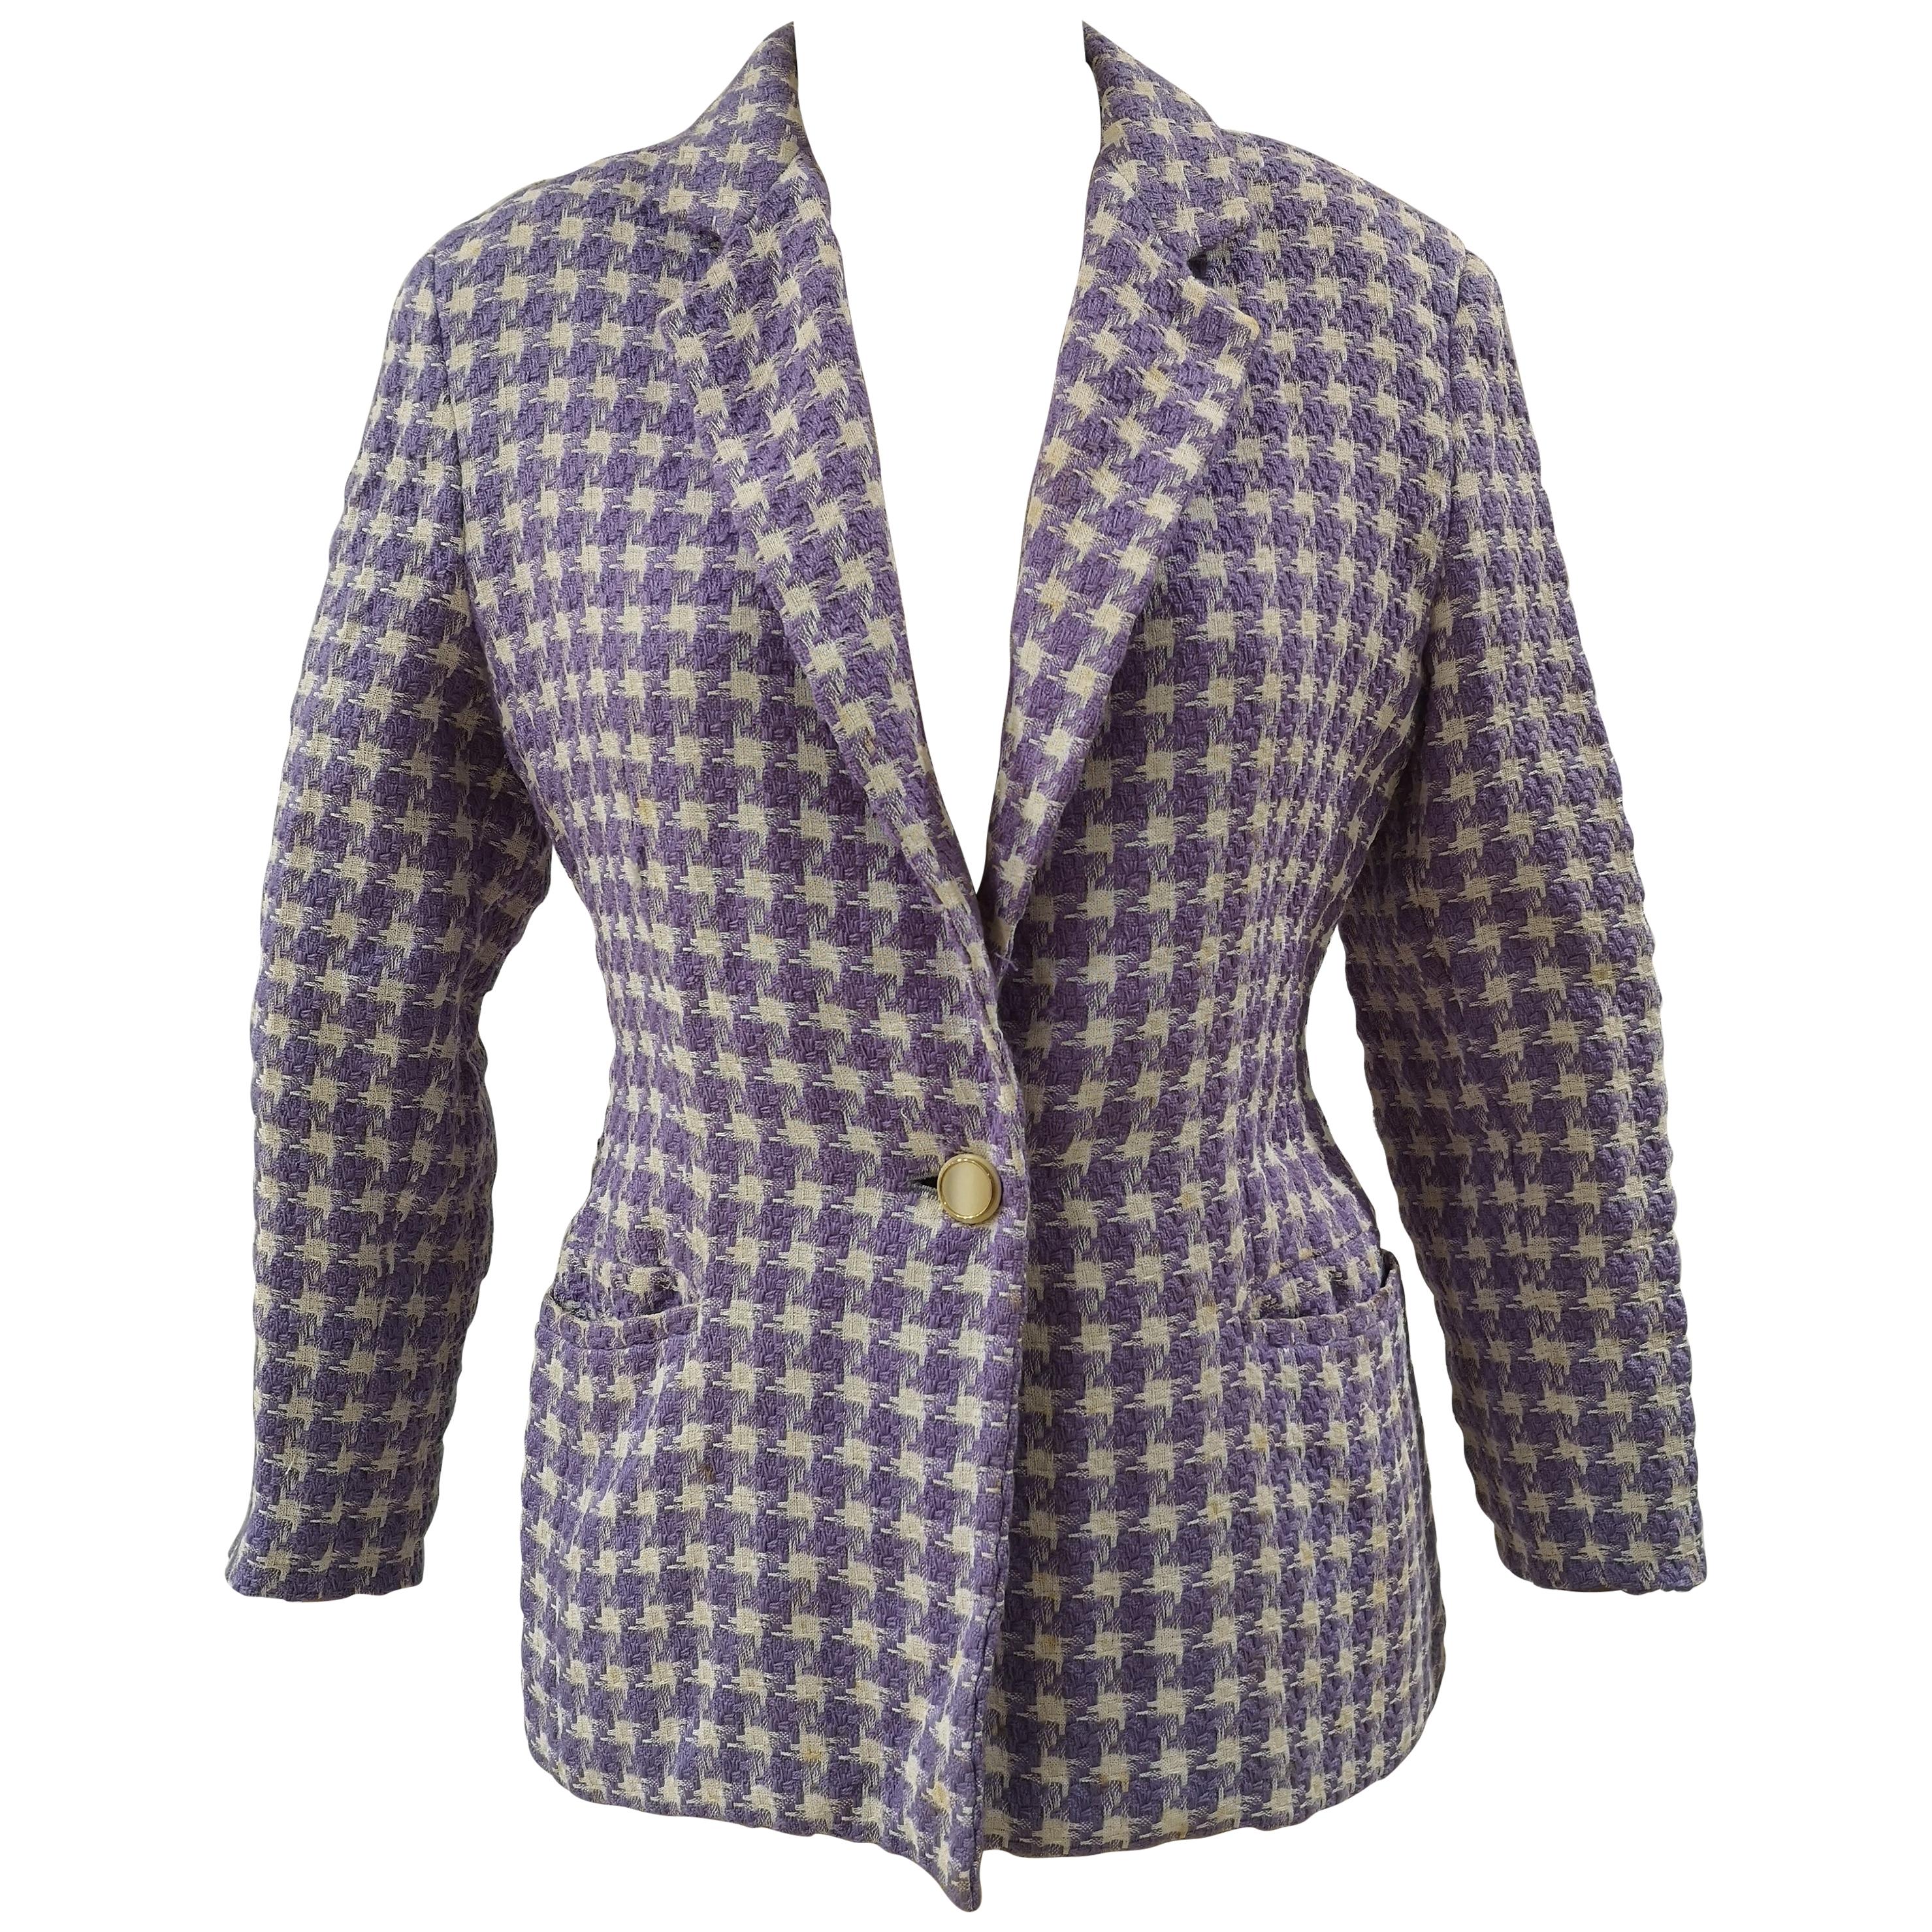 Byblos light purple and white wool jacket